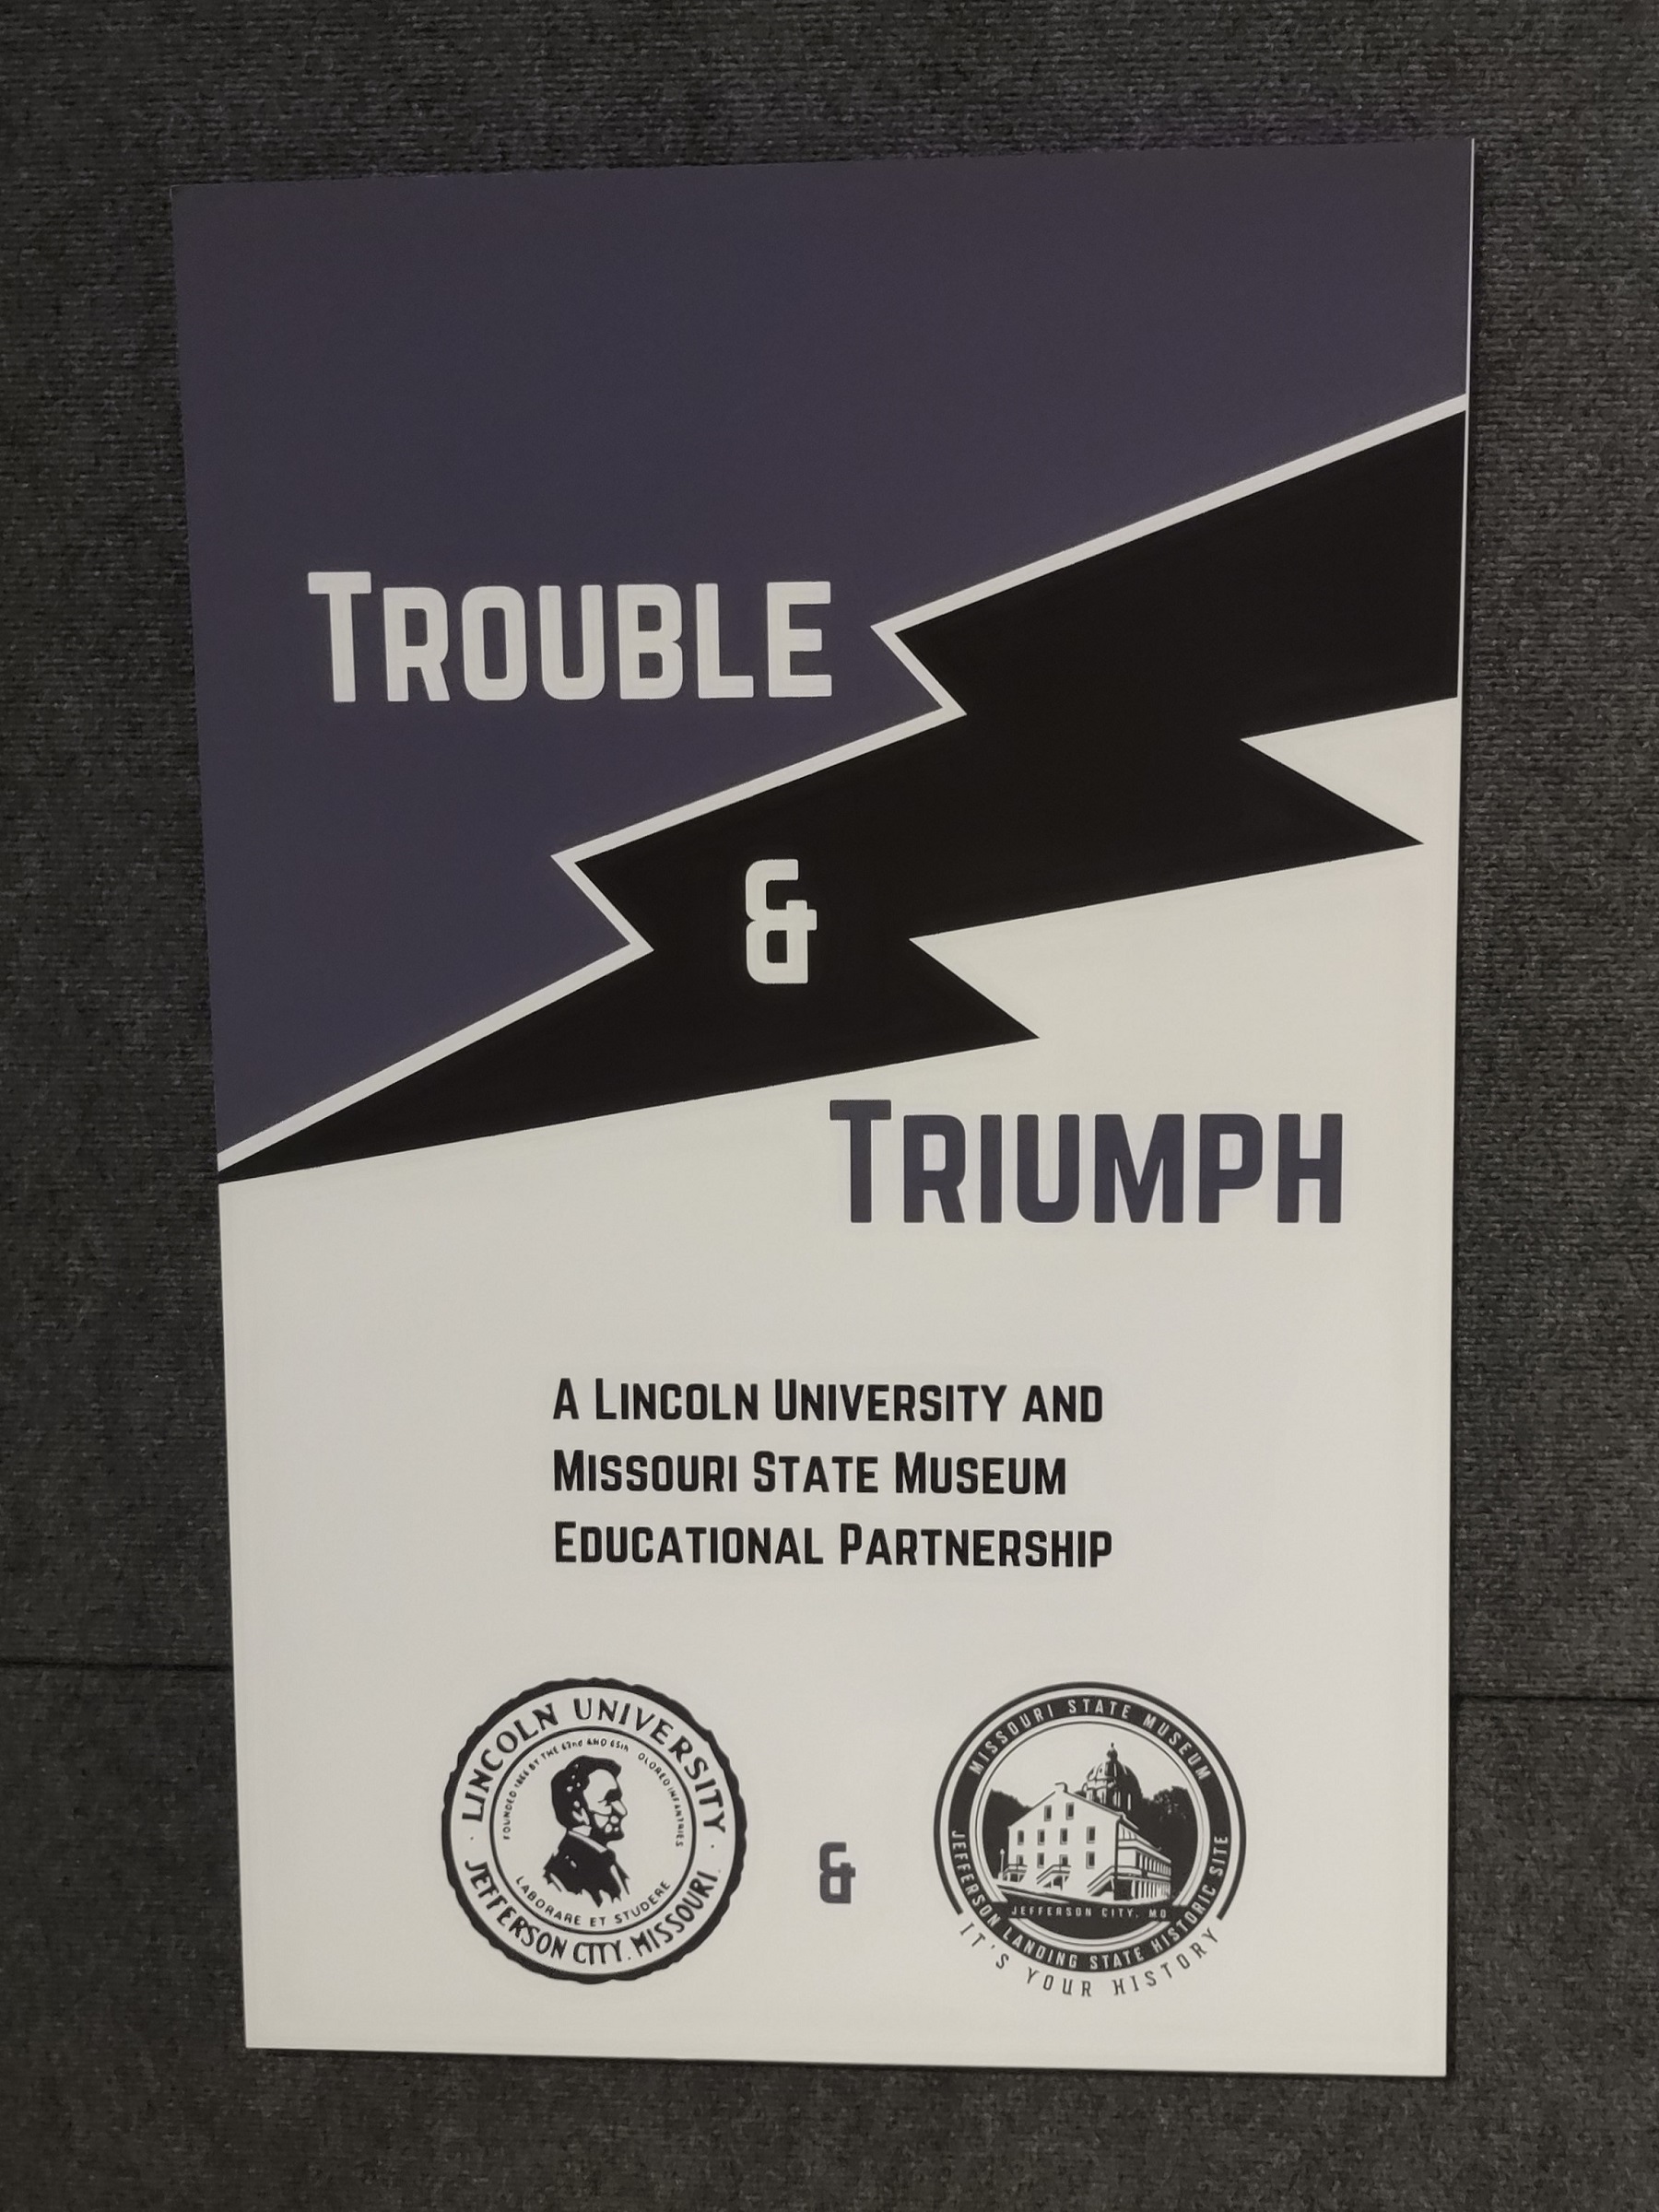 Trouble & Triumph - A Lincoln University and Missouri State Museum Educational Partnership